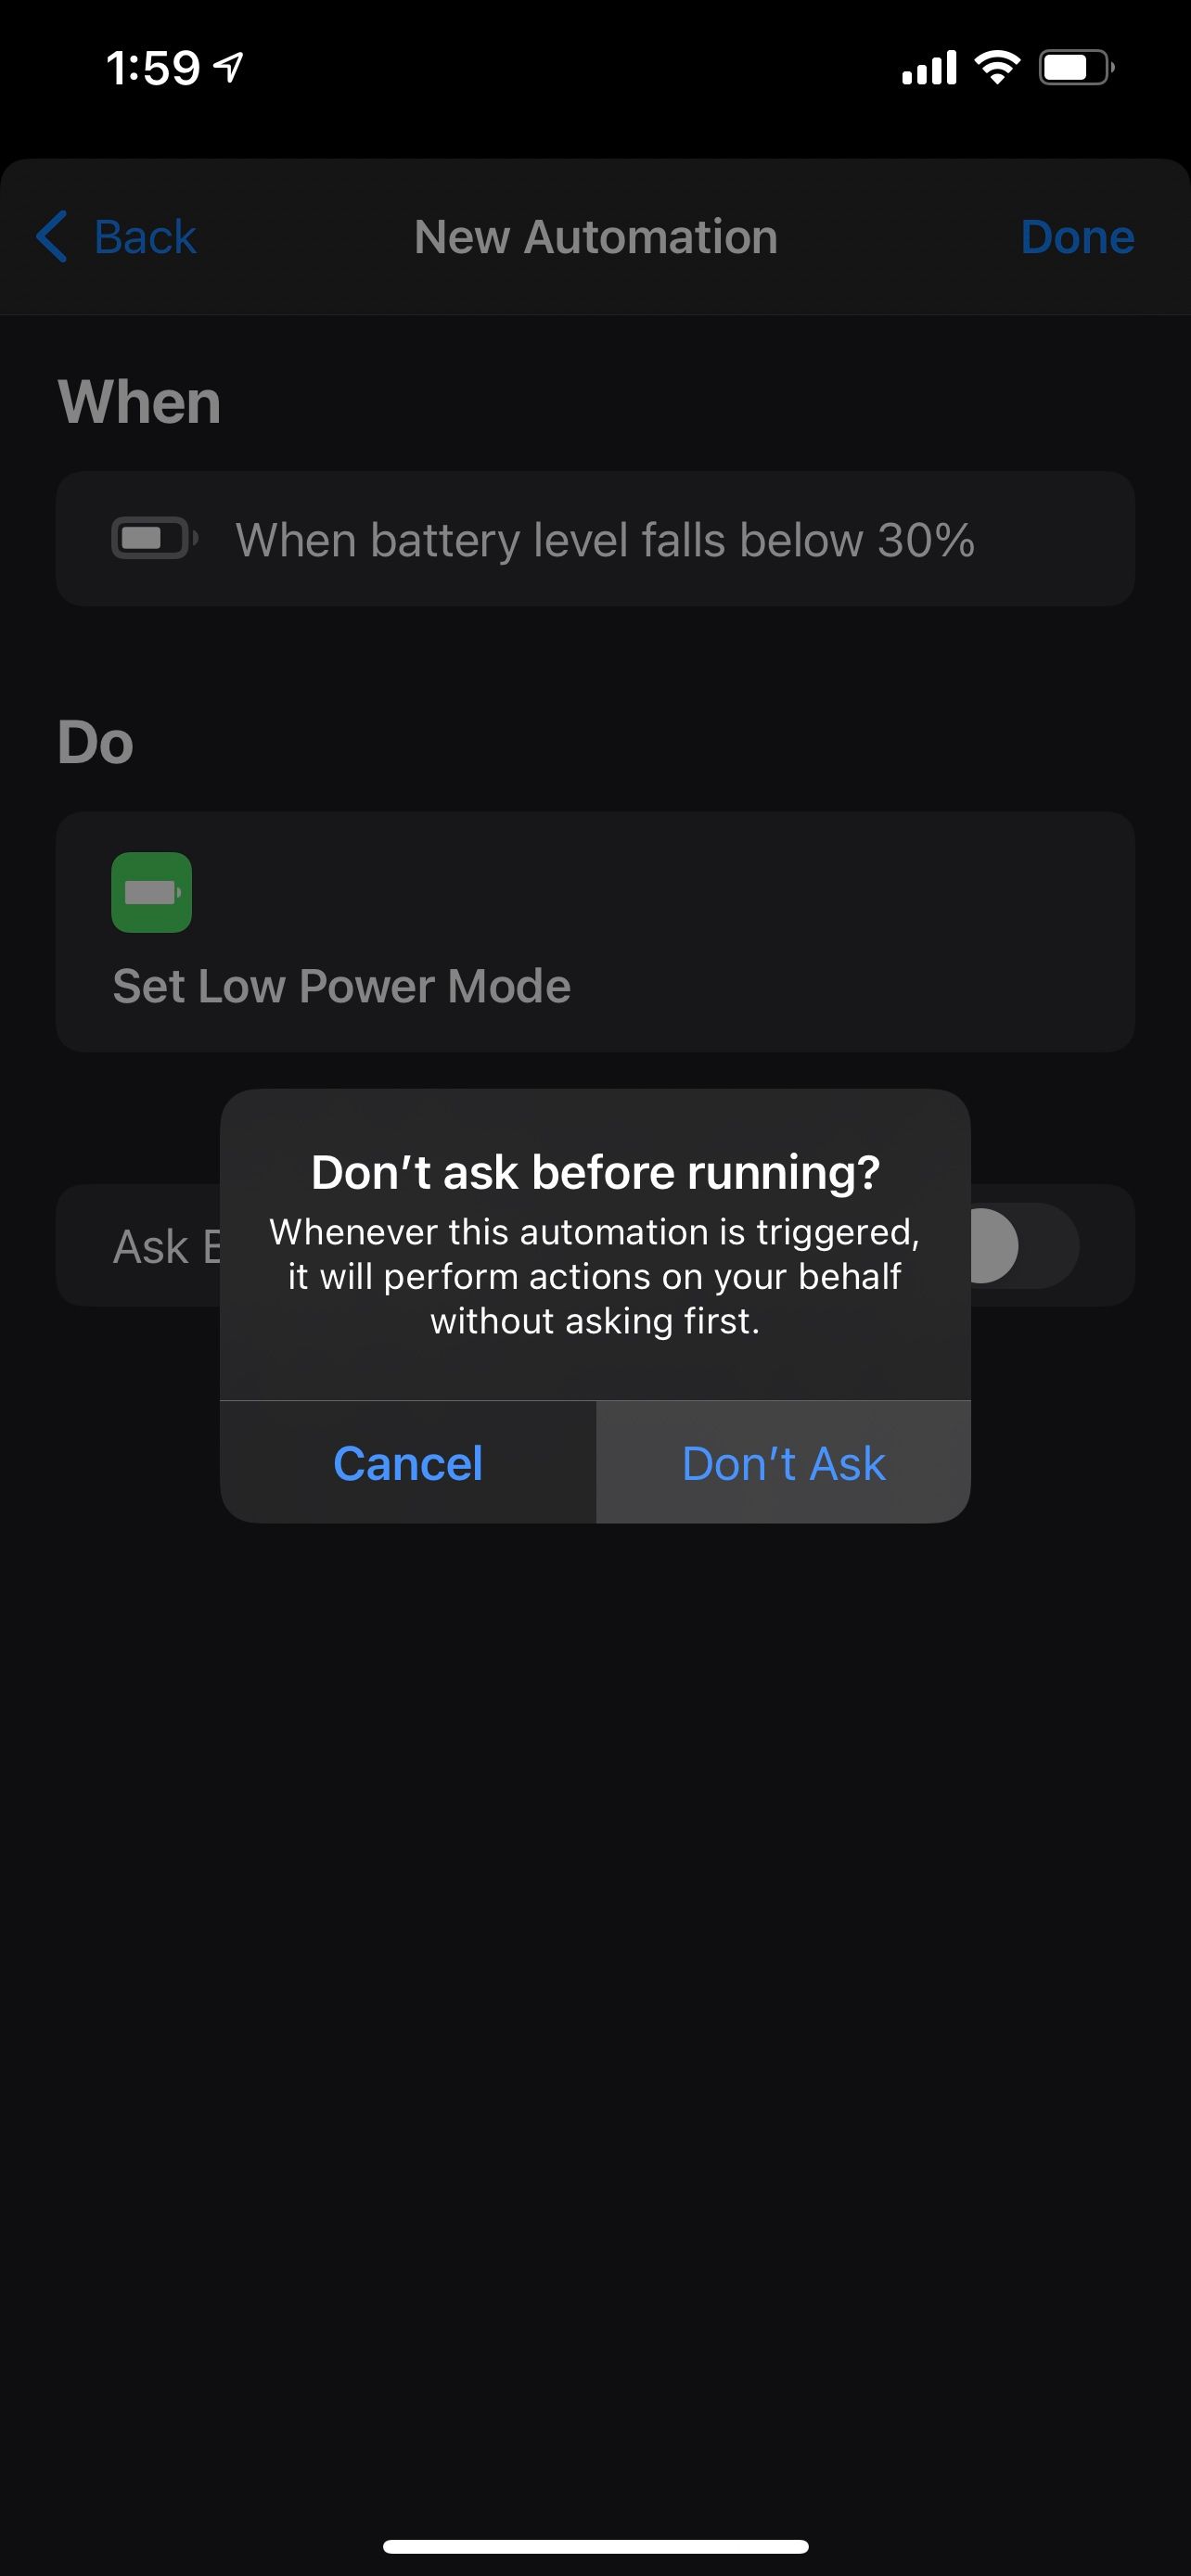 Automation Ask Before Running alert